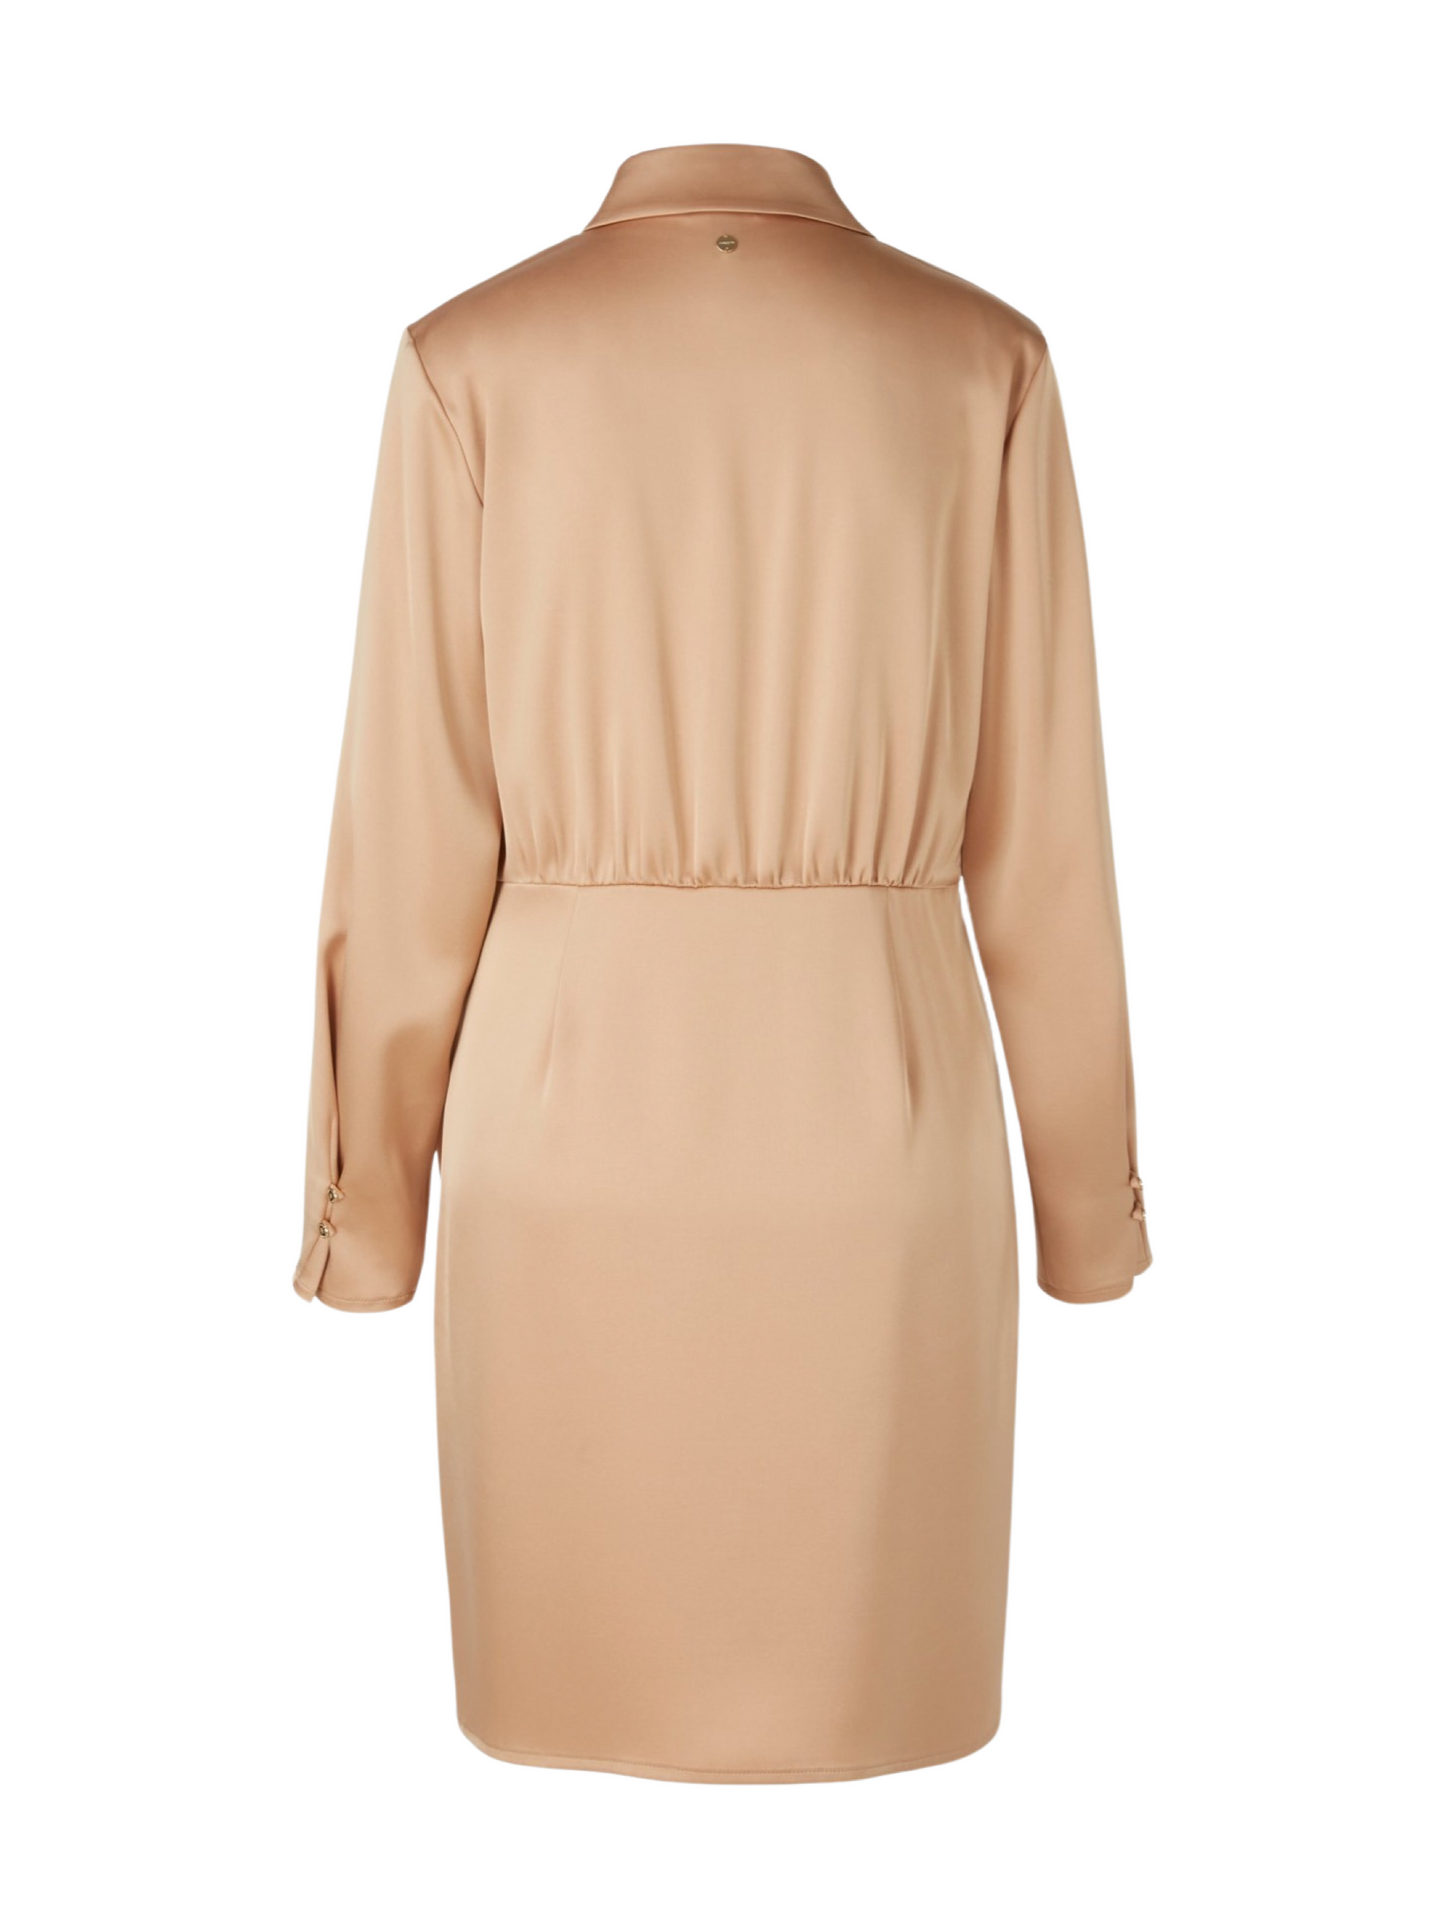 Marc Cain Dress With Wrap in Bright Toffee